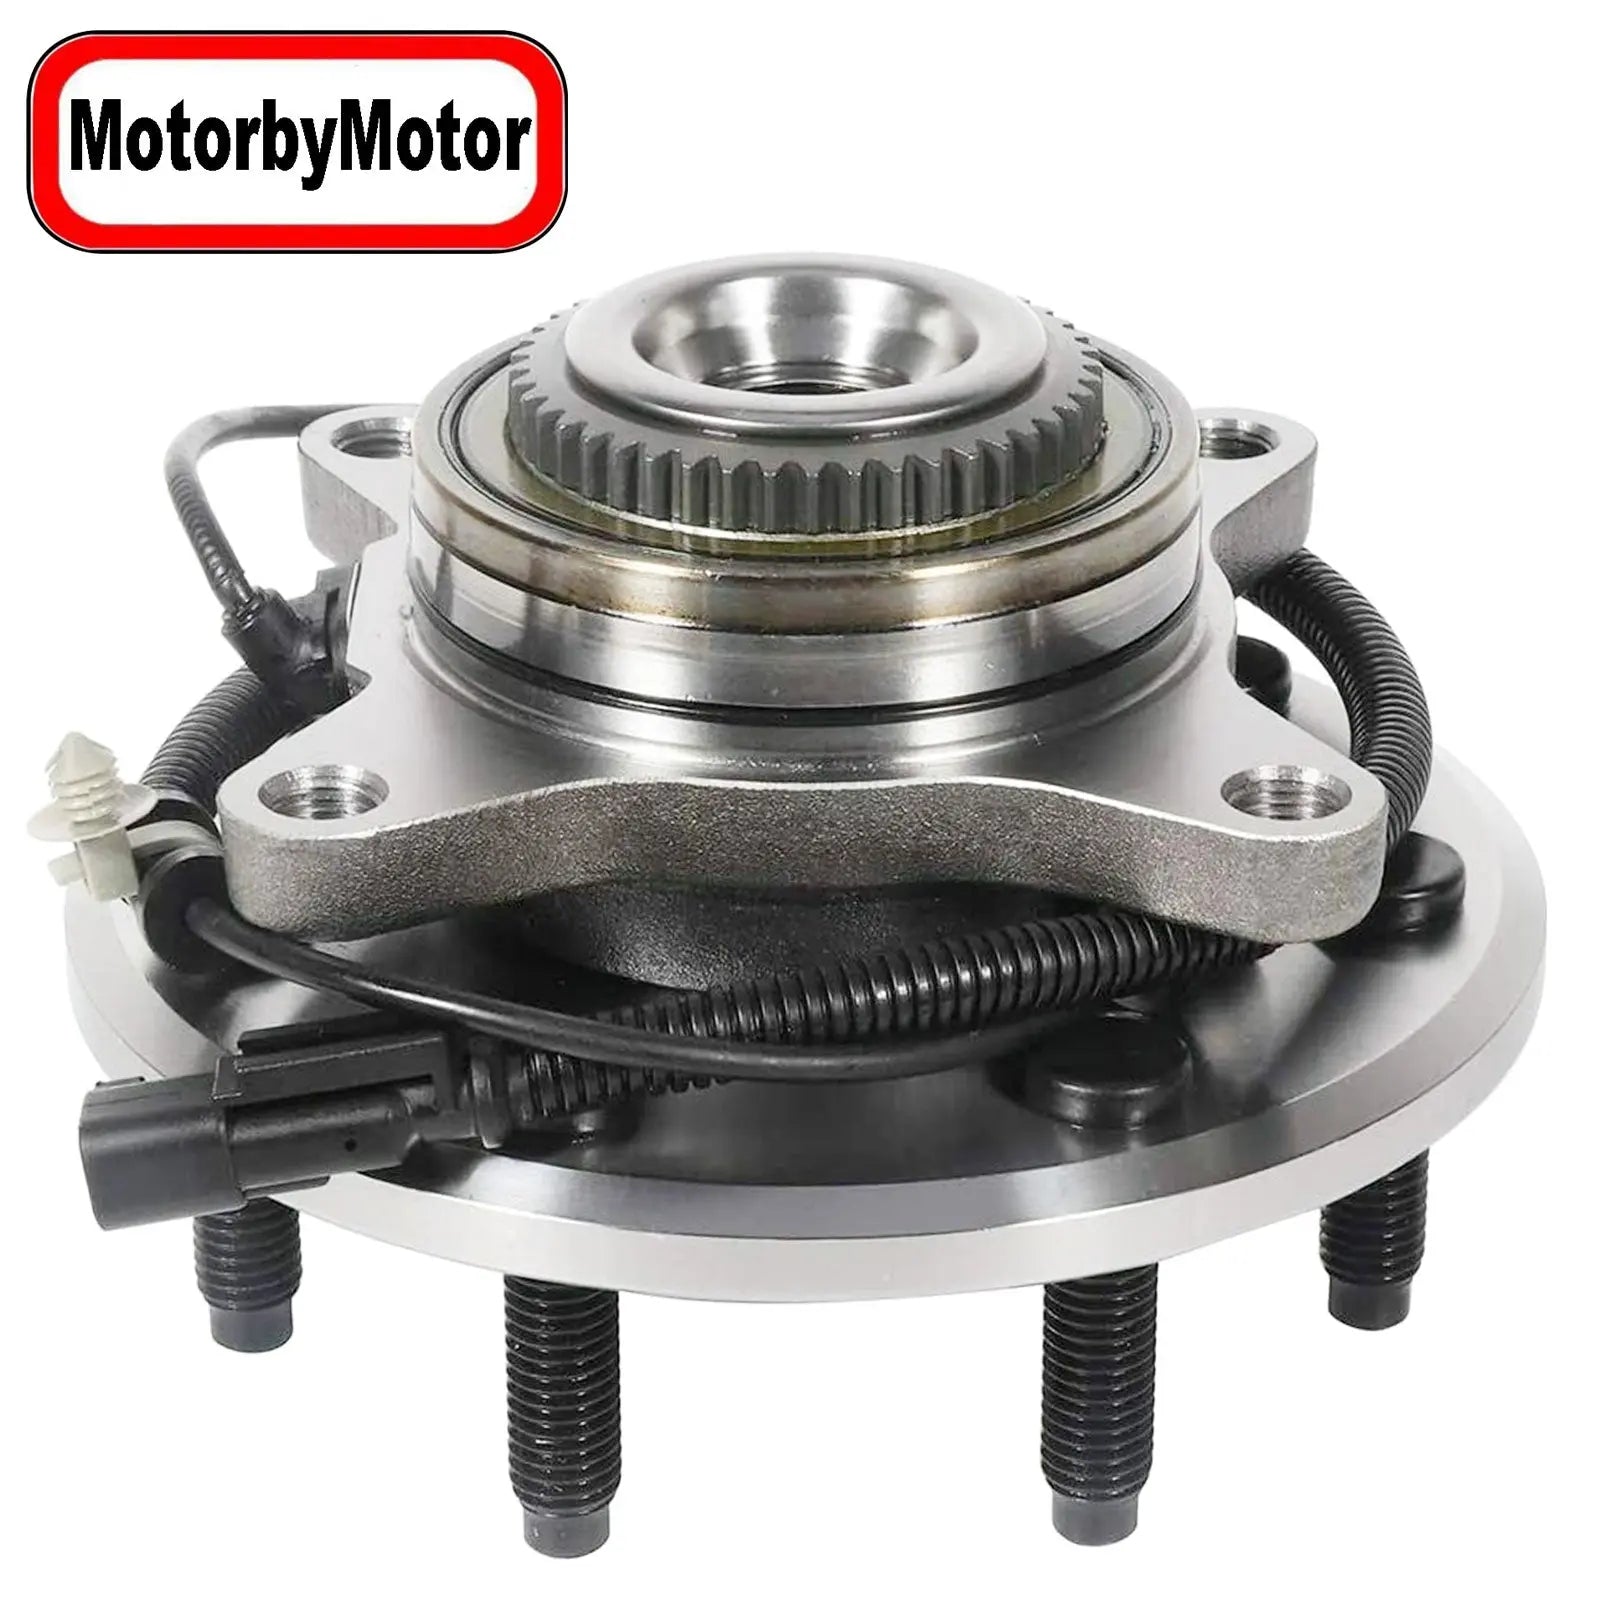 MotorbyMotor 513326 Front Wheel Bearing and Hub Assembly with 7 Lugs Fits for Ford F-150 2011-2014 Hub Bearing Assembly (w/ABS, 2WD 4WD Heavy Duty Payload) MotorbyMotor